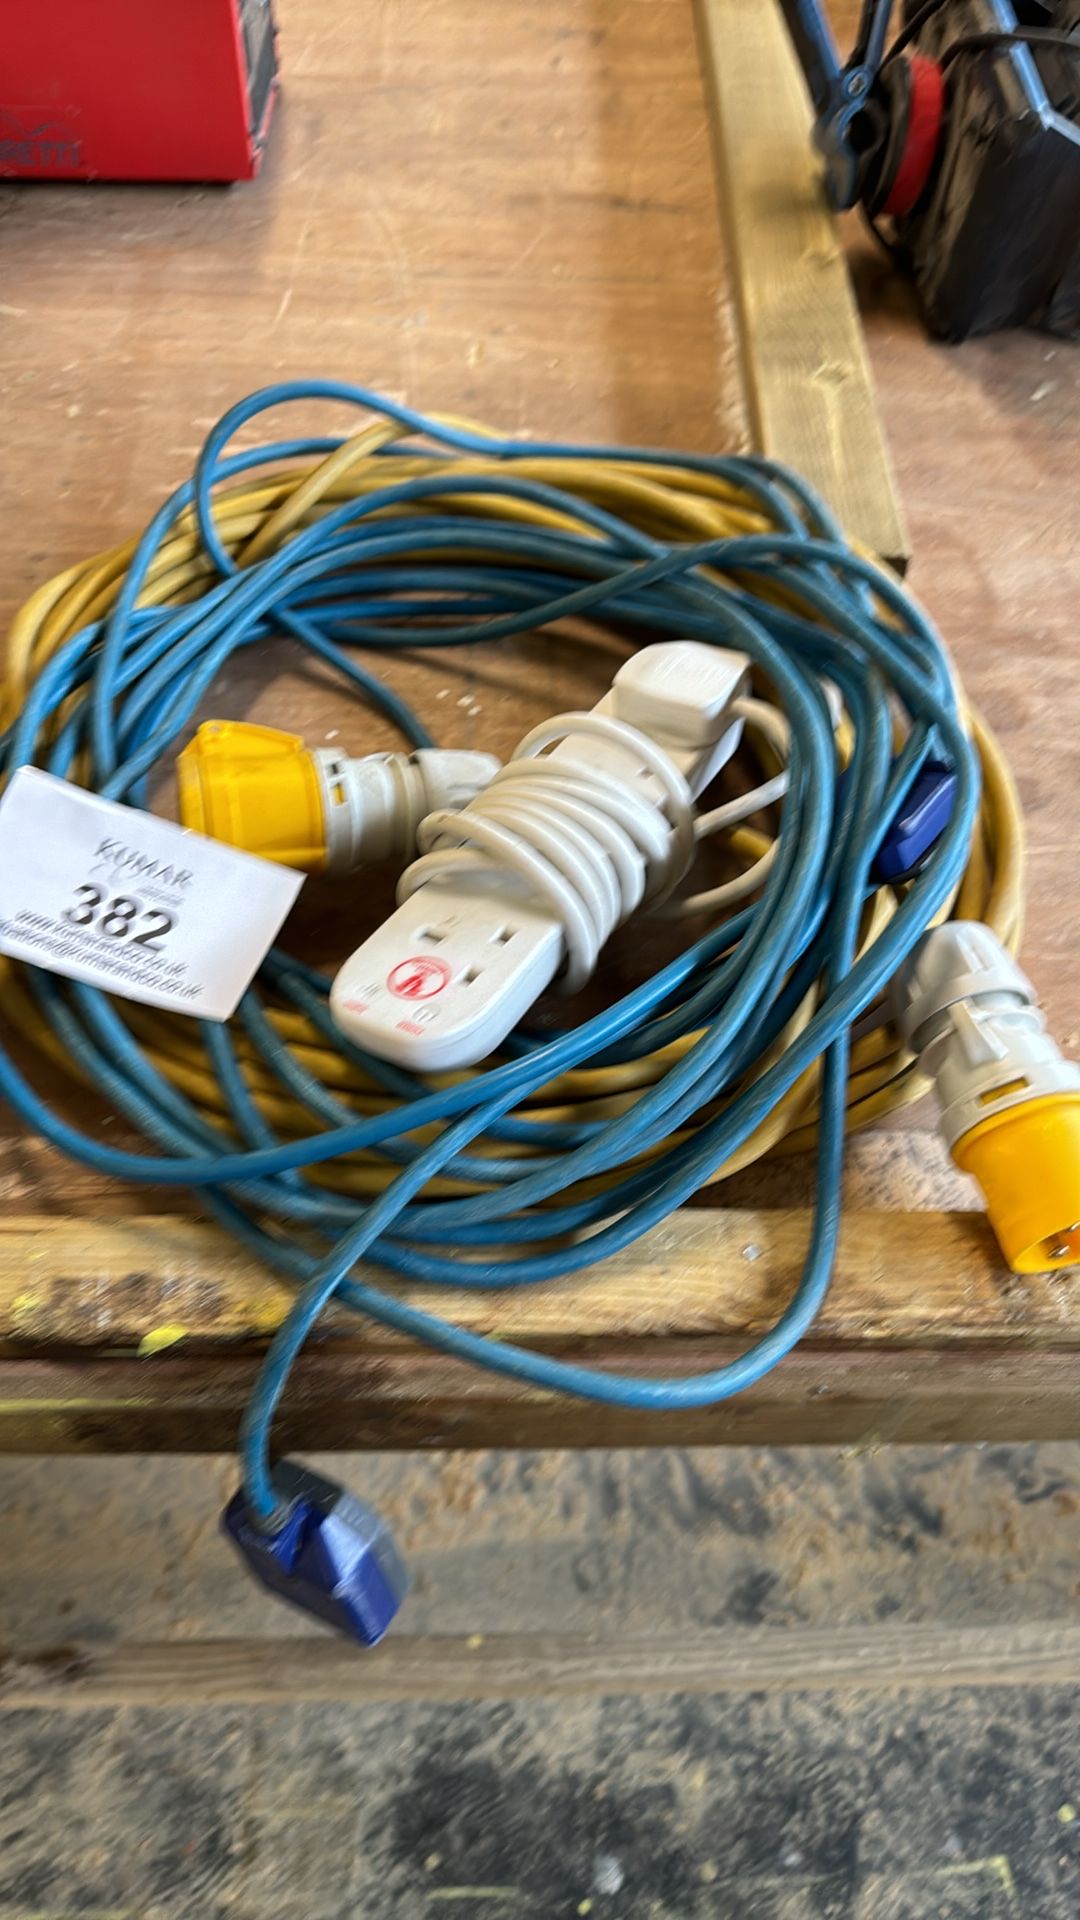 Site 25m 110V Extension Reel with Various Extension Cables - Image 3 of 5